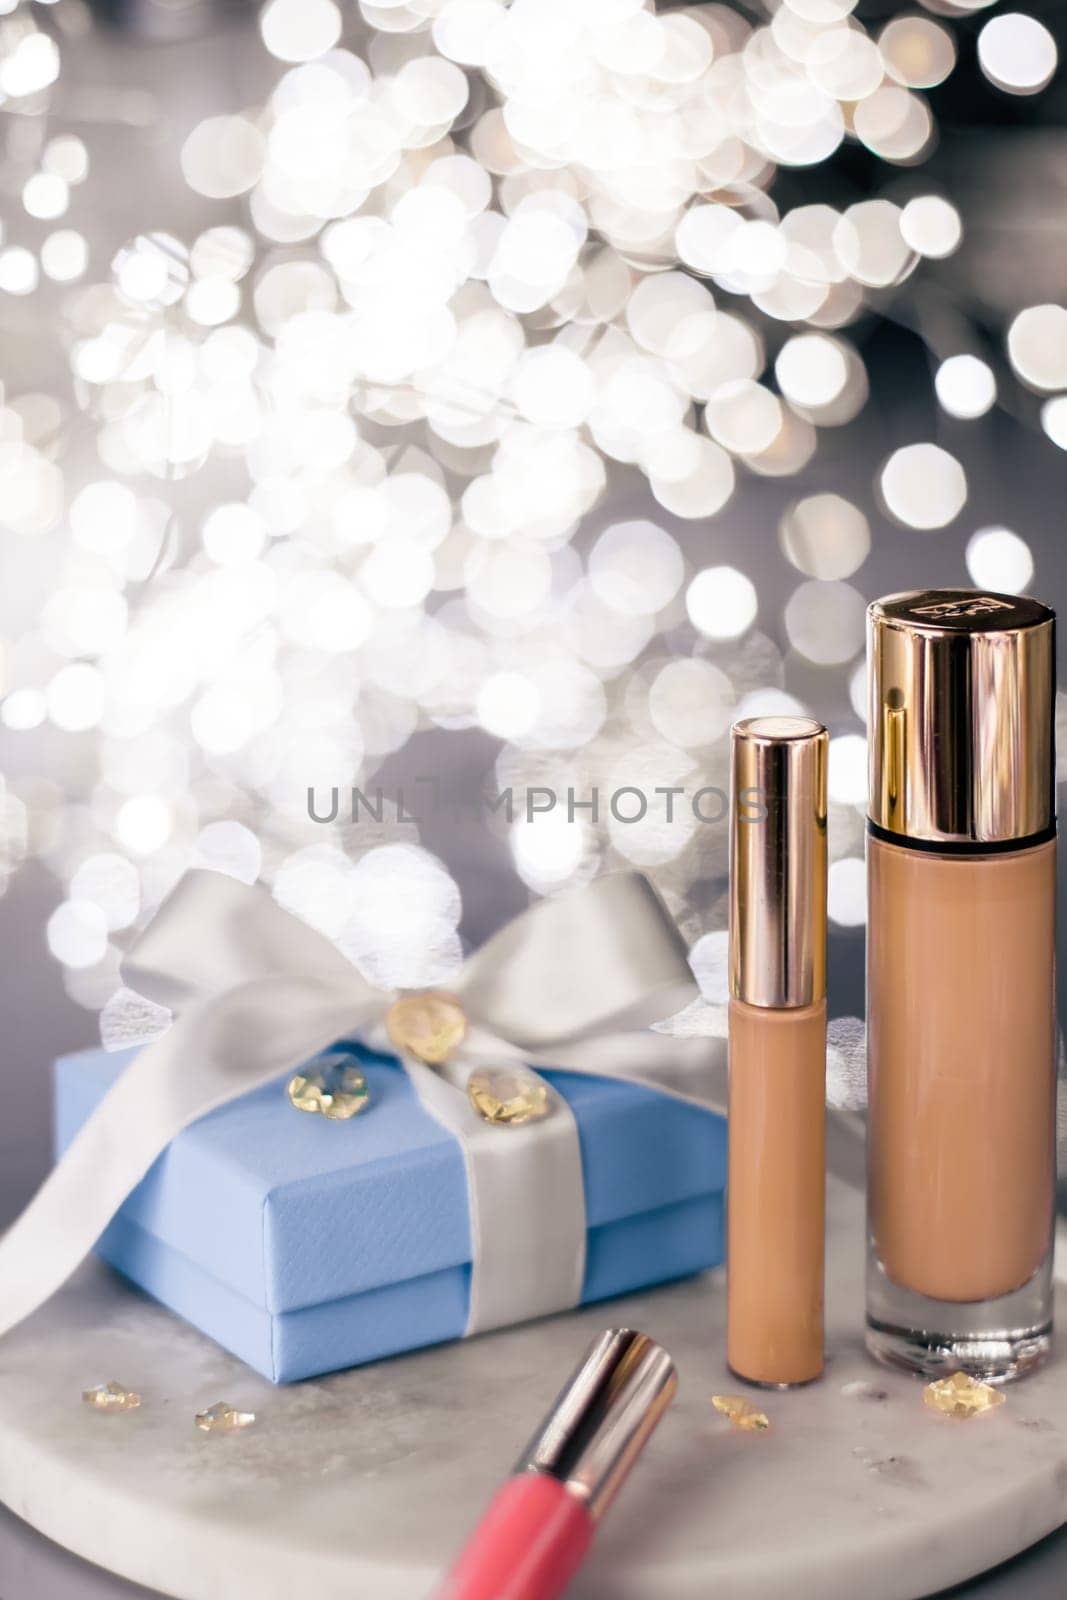 luxury make-up products as a gift - beauty, cosmetics and makeup styled concept, elegant visuals